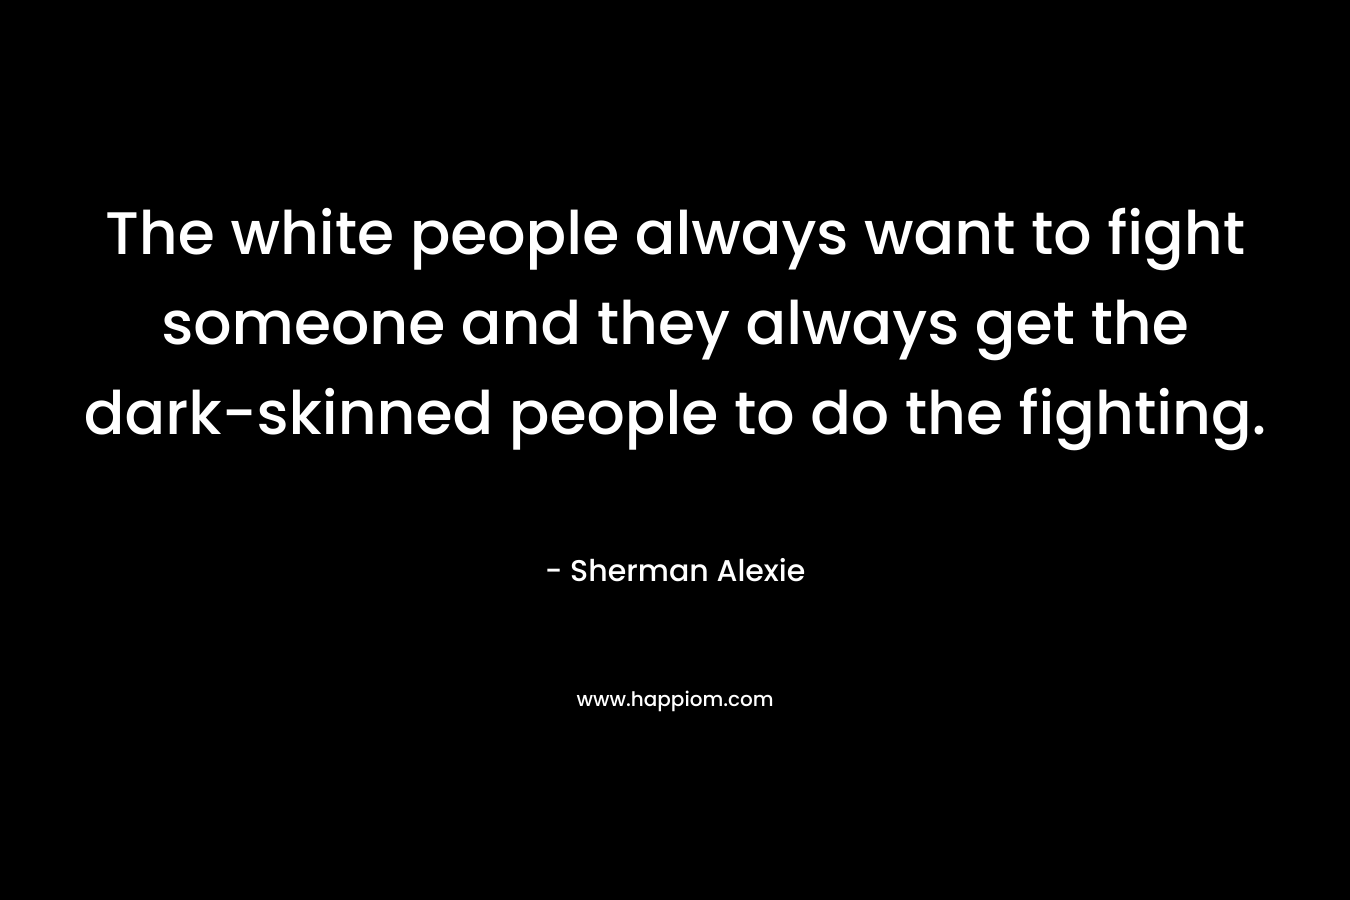 The white people always want to fight someone and they always get the dark-skinned people to do the fighting.